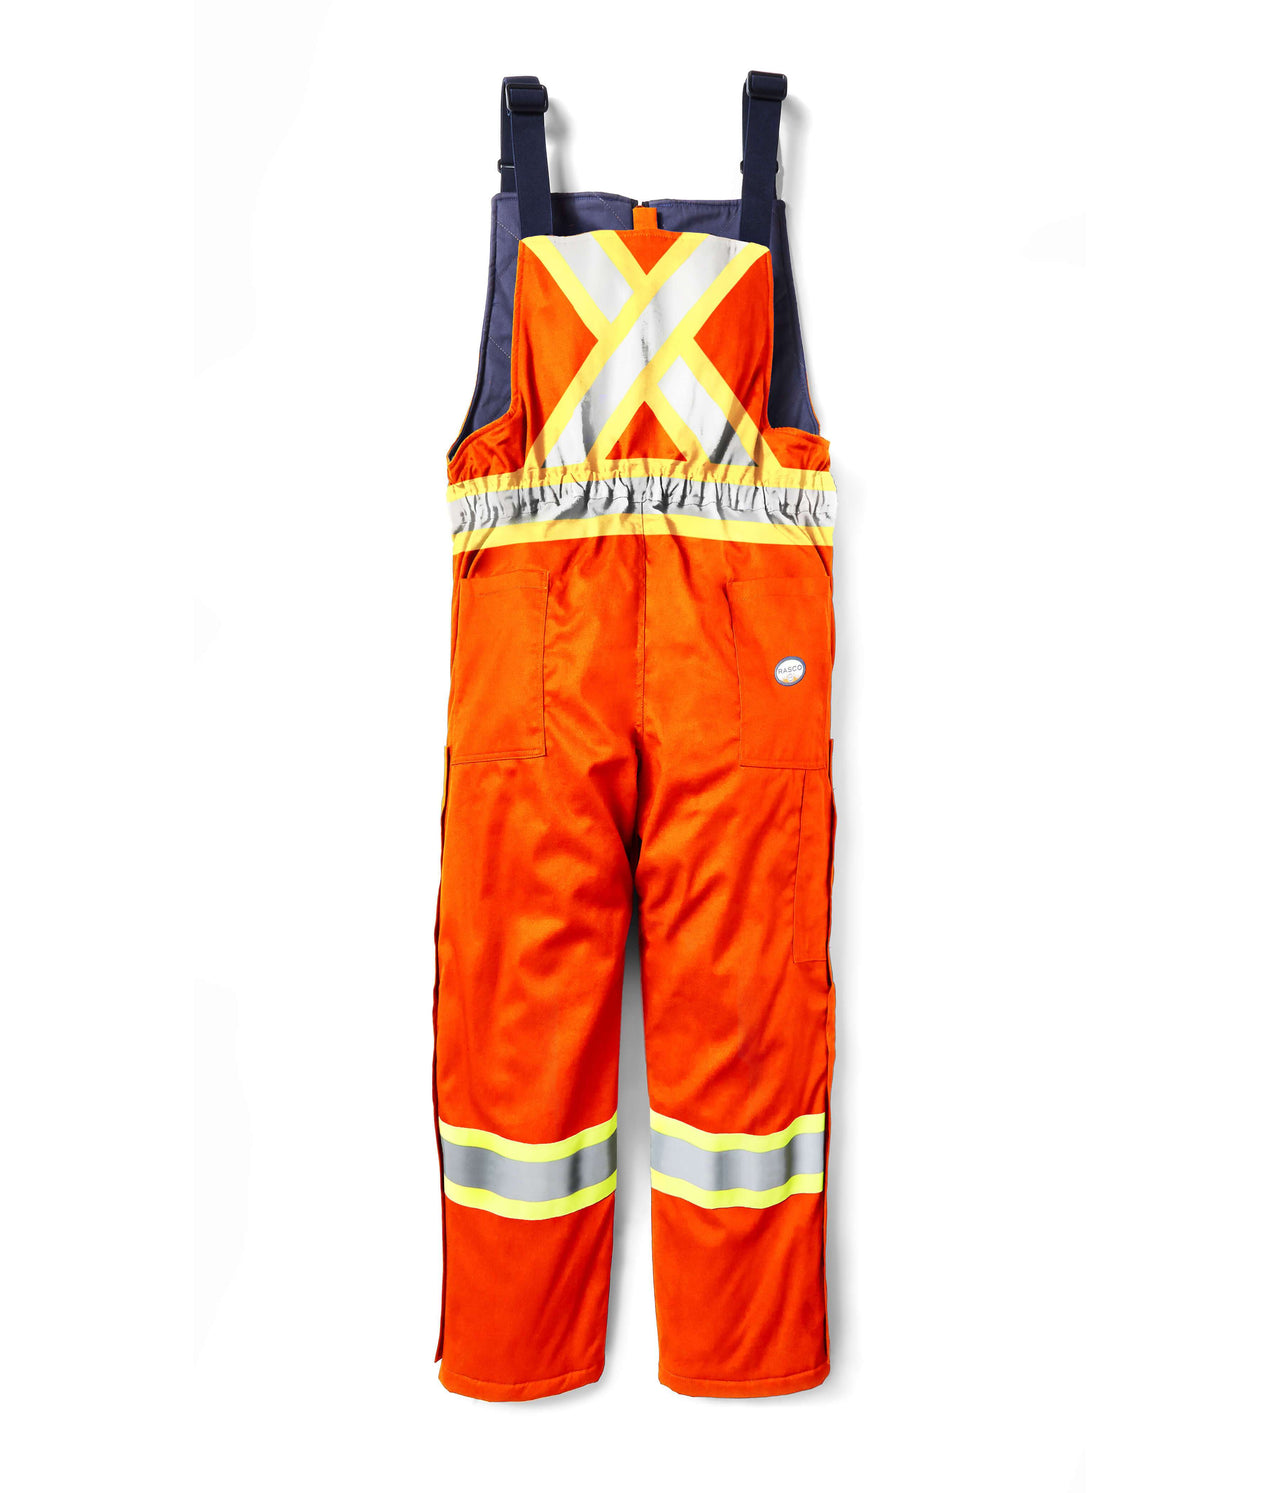 Rasco FR Hi Vis Orange Insulated Bib Overall with 4" Reflective Tape FR6706OH